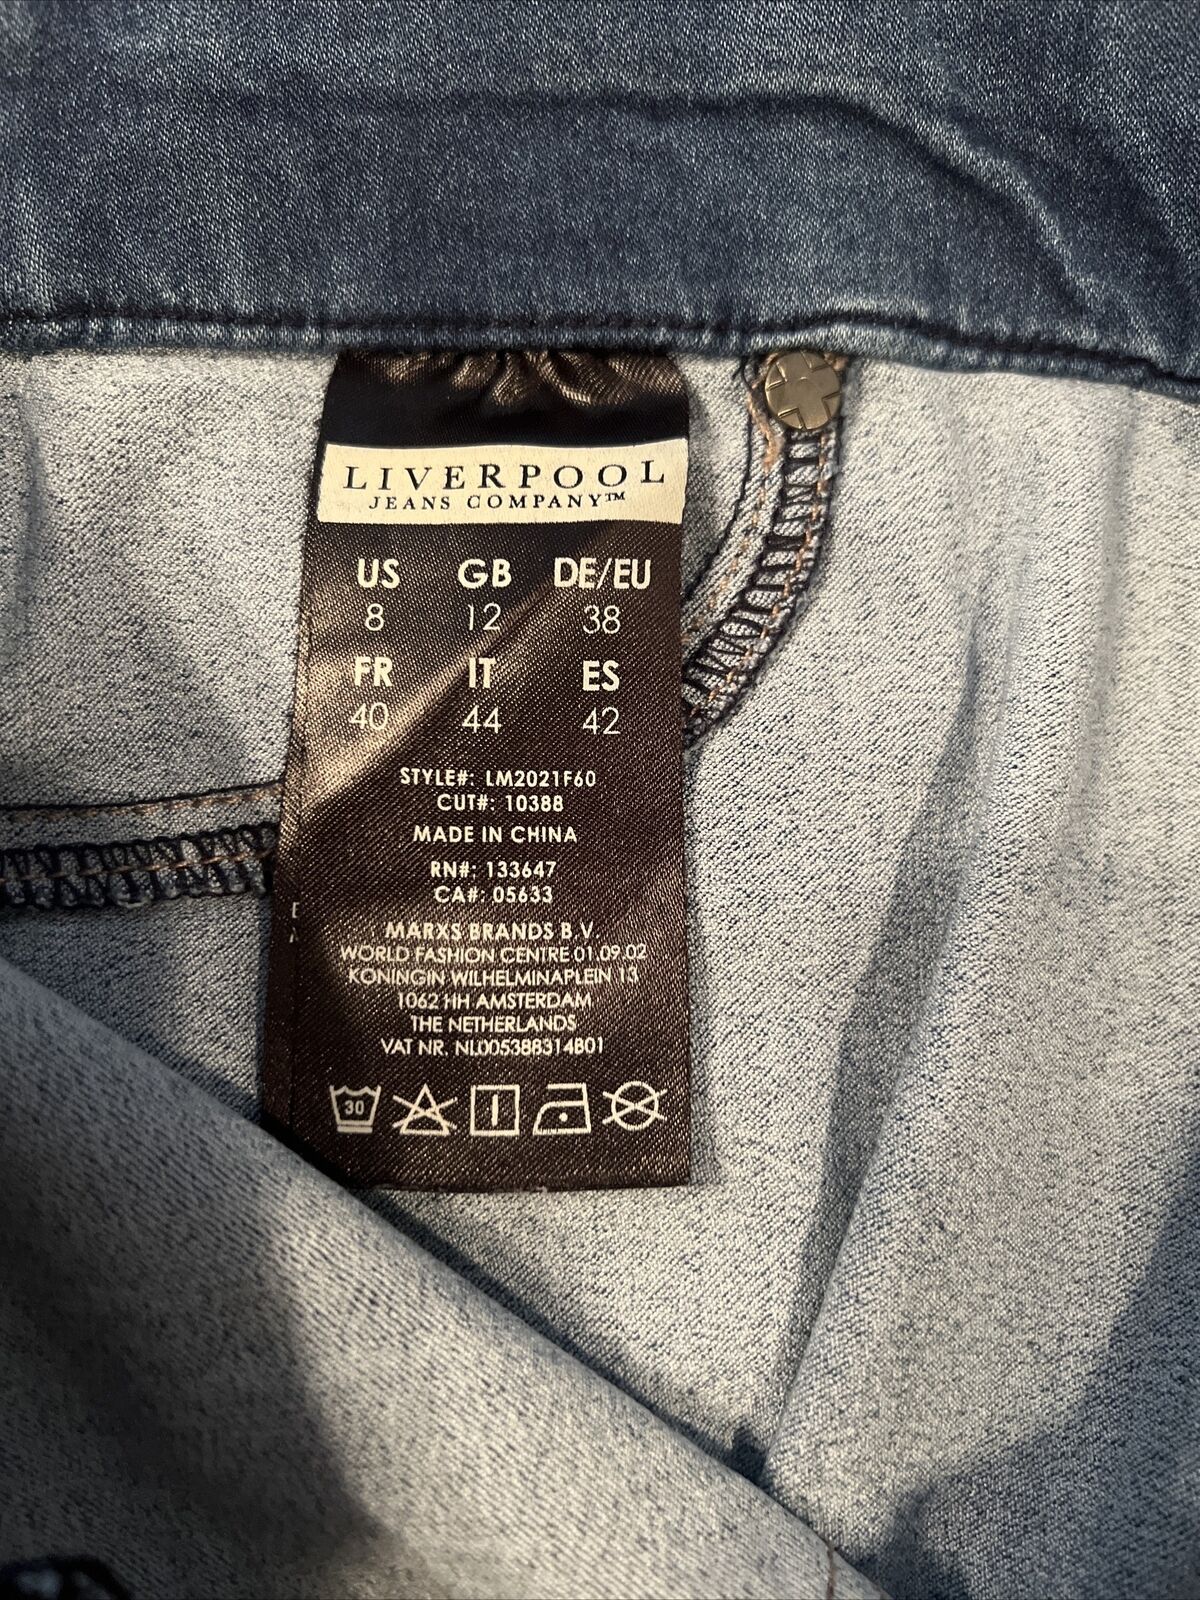 Liverpool Mira Skinny Jeans Size 8/29 - image 5